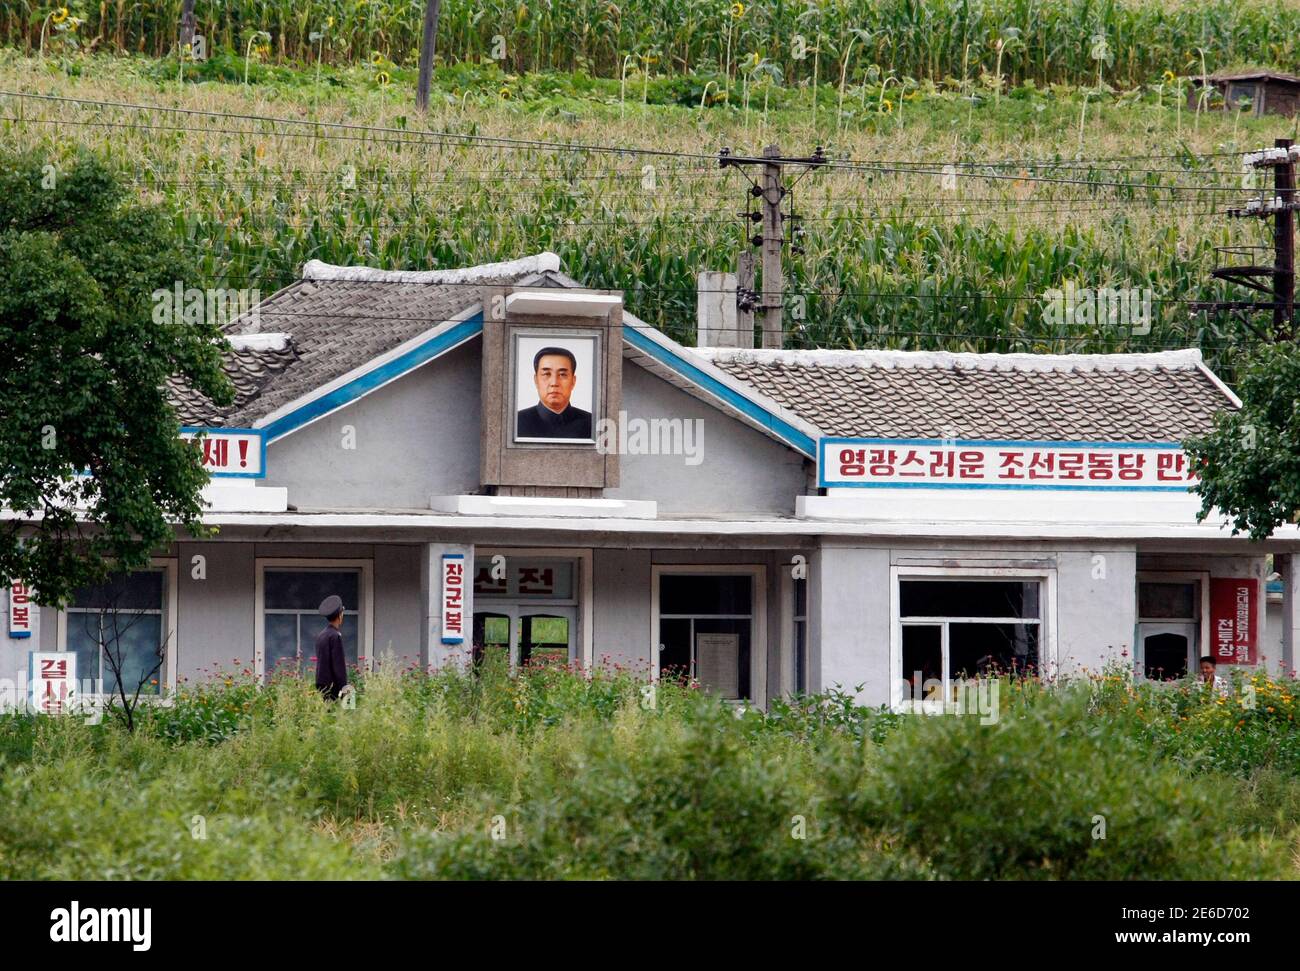 A railway worker looks up at a portrait of late North Korean leader Kim Il-Sung at a railway station in Hoeryong, North Hamgyong province August 28, 2013. Picture taken August 28, 2013. REUTERS/Jacky Chen (NORTH KOREA - Tags: SOCIETY TRANSPORT) Stock Photo